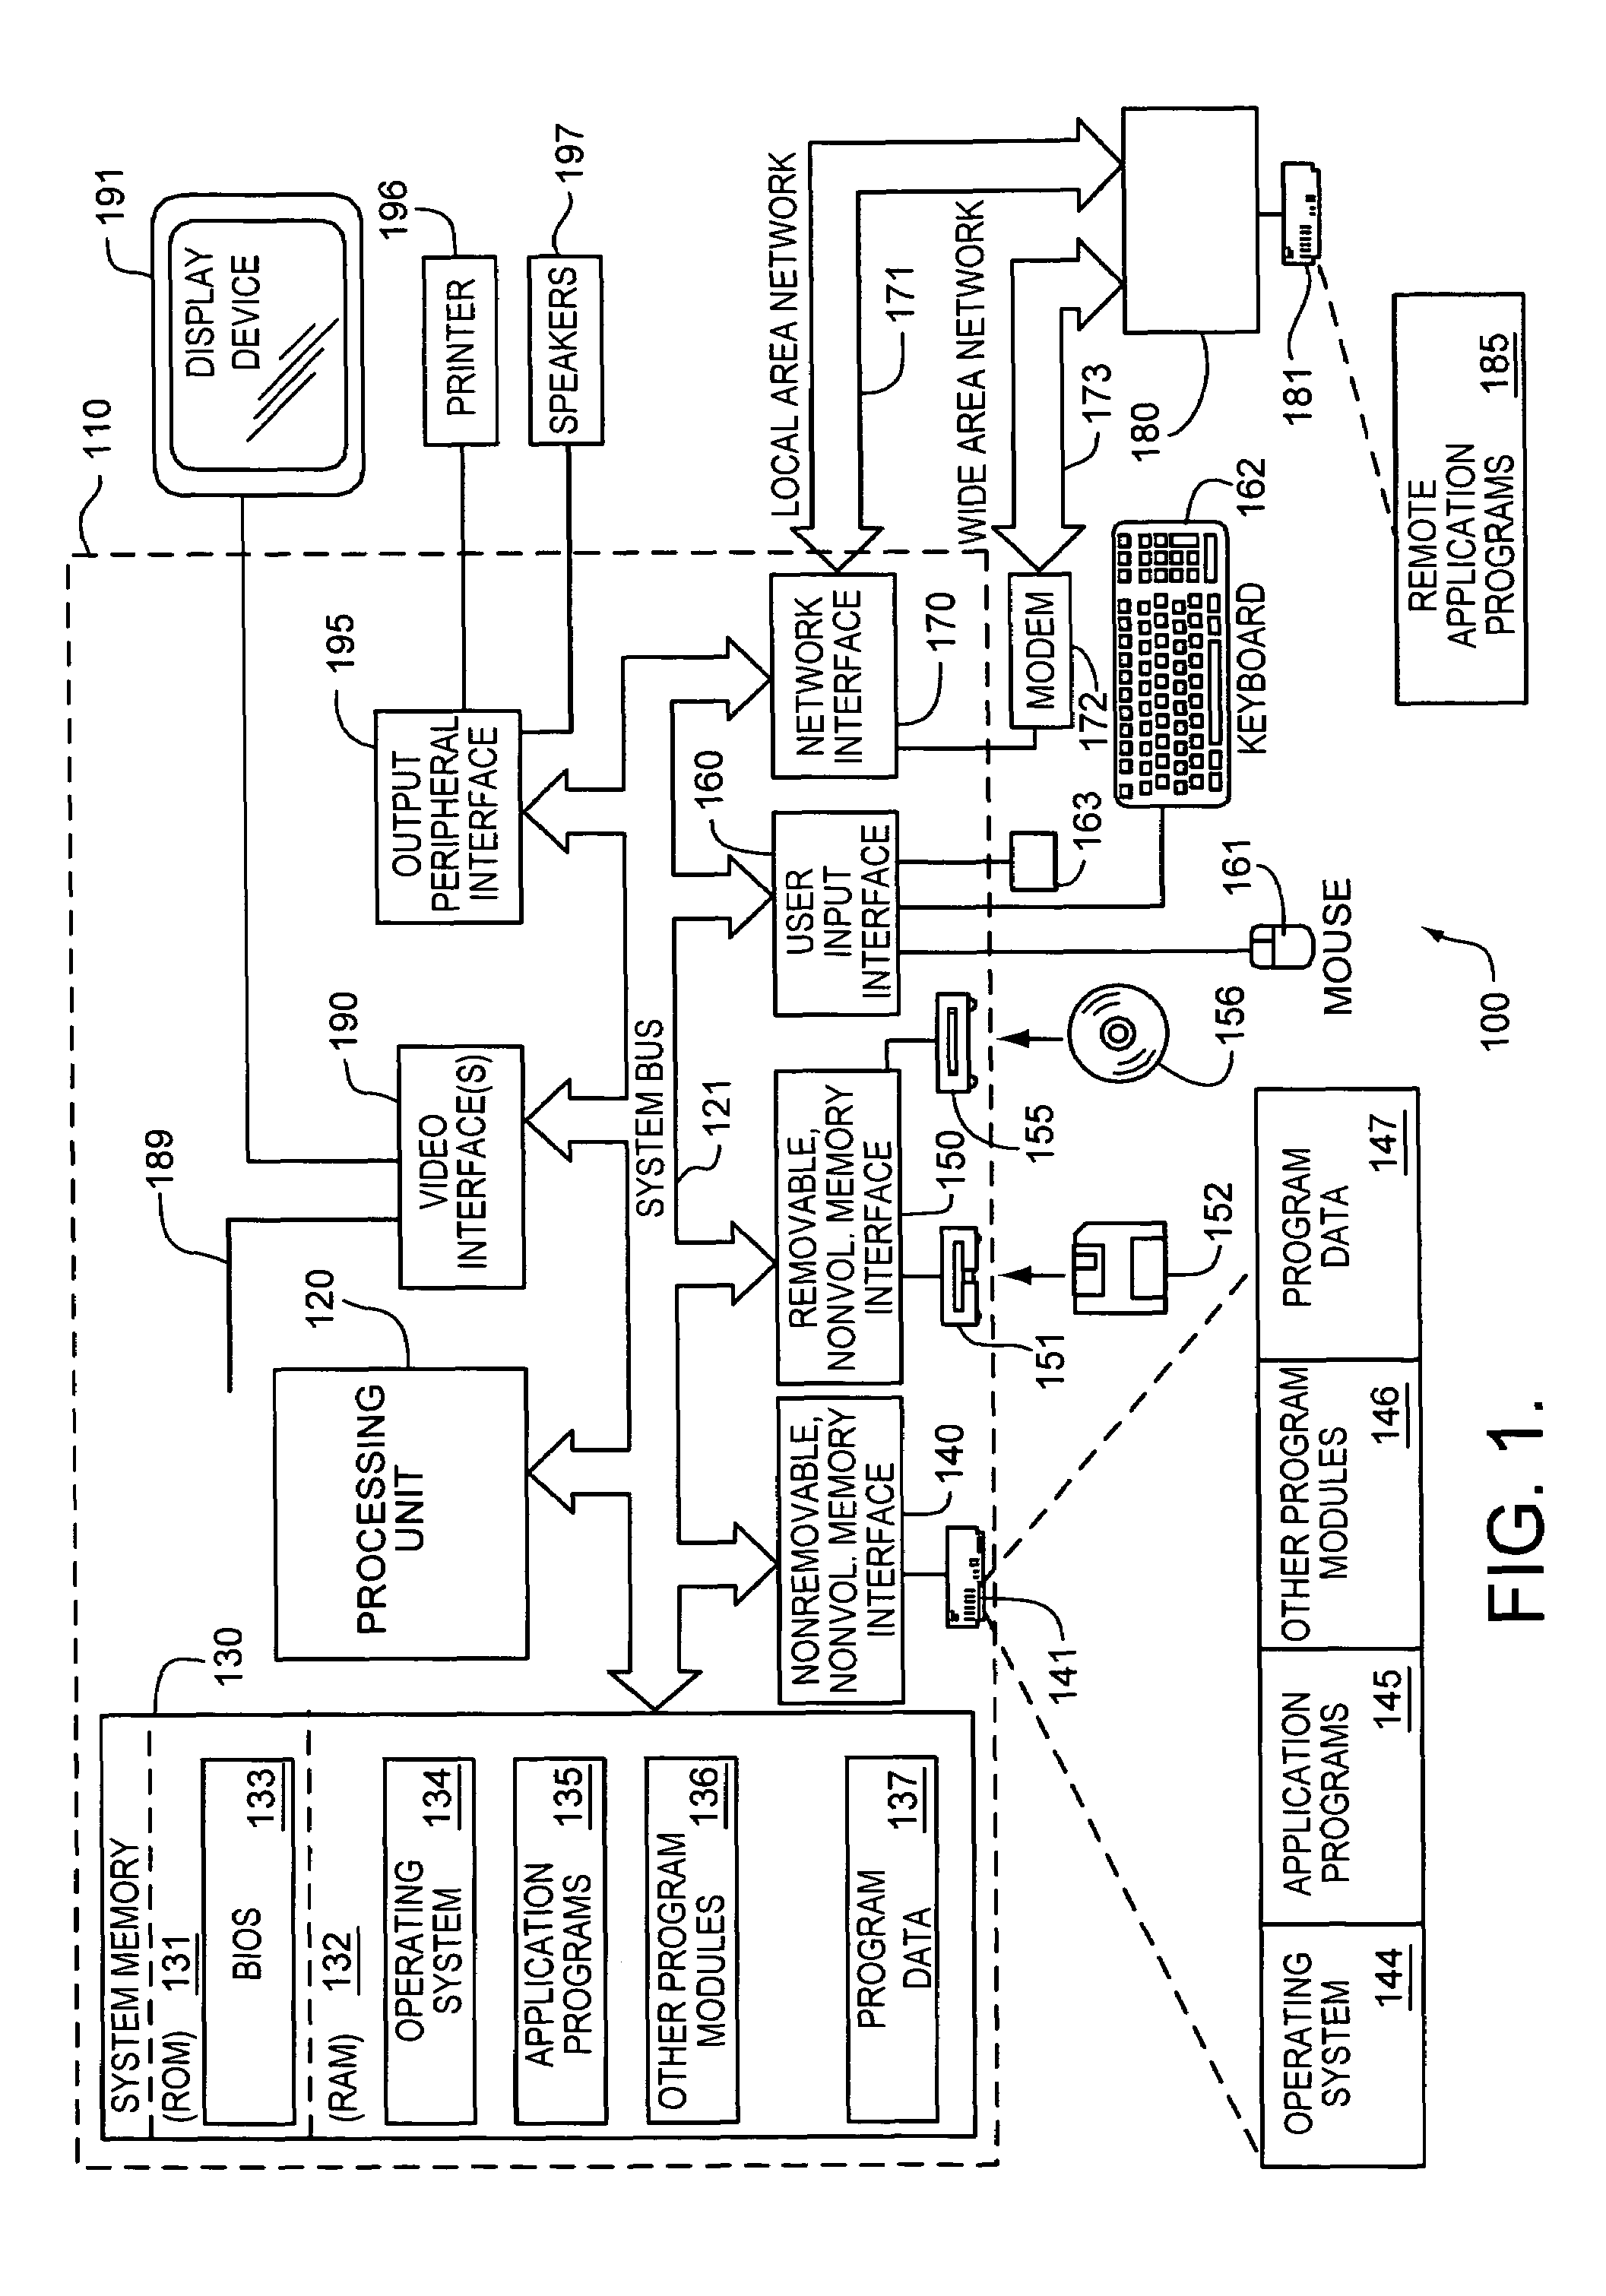 System and method for selecting a setting by continuous or discrete controls